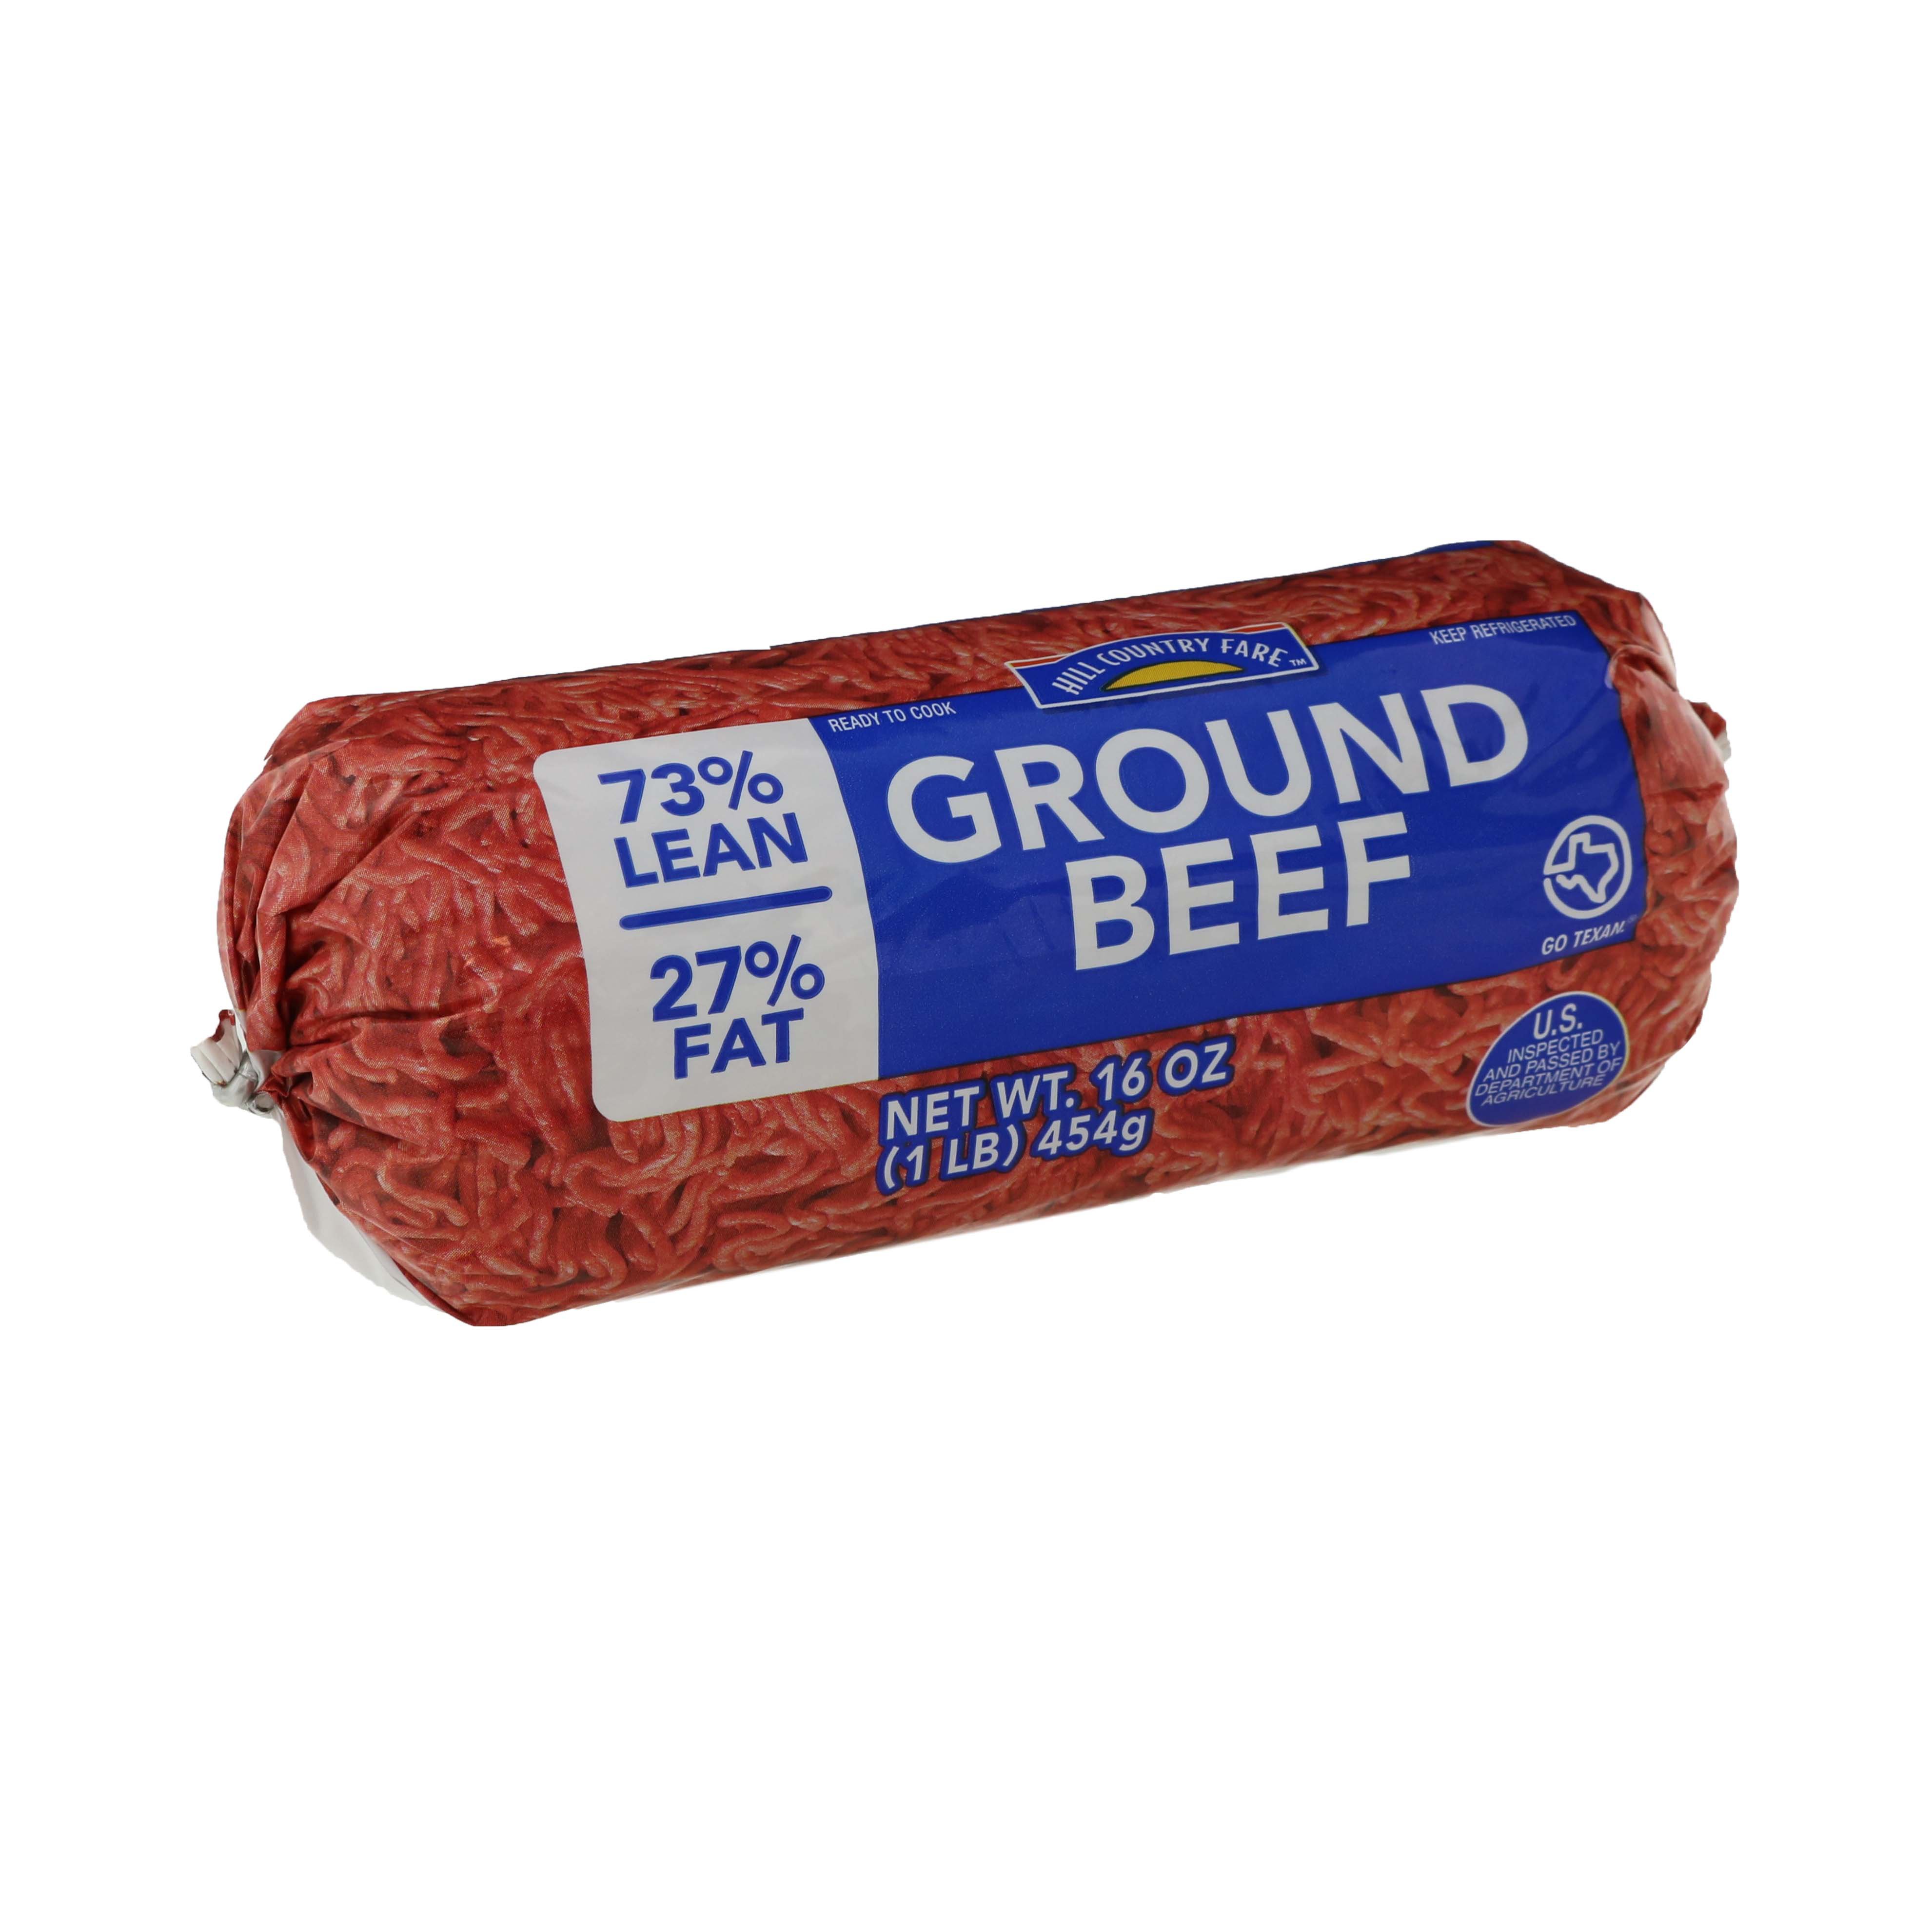 Hill Country Fare Ground Beef, 73% Lean